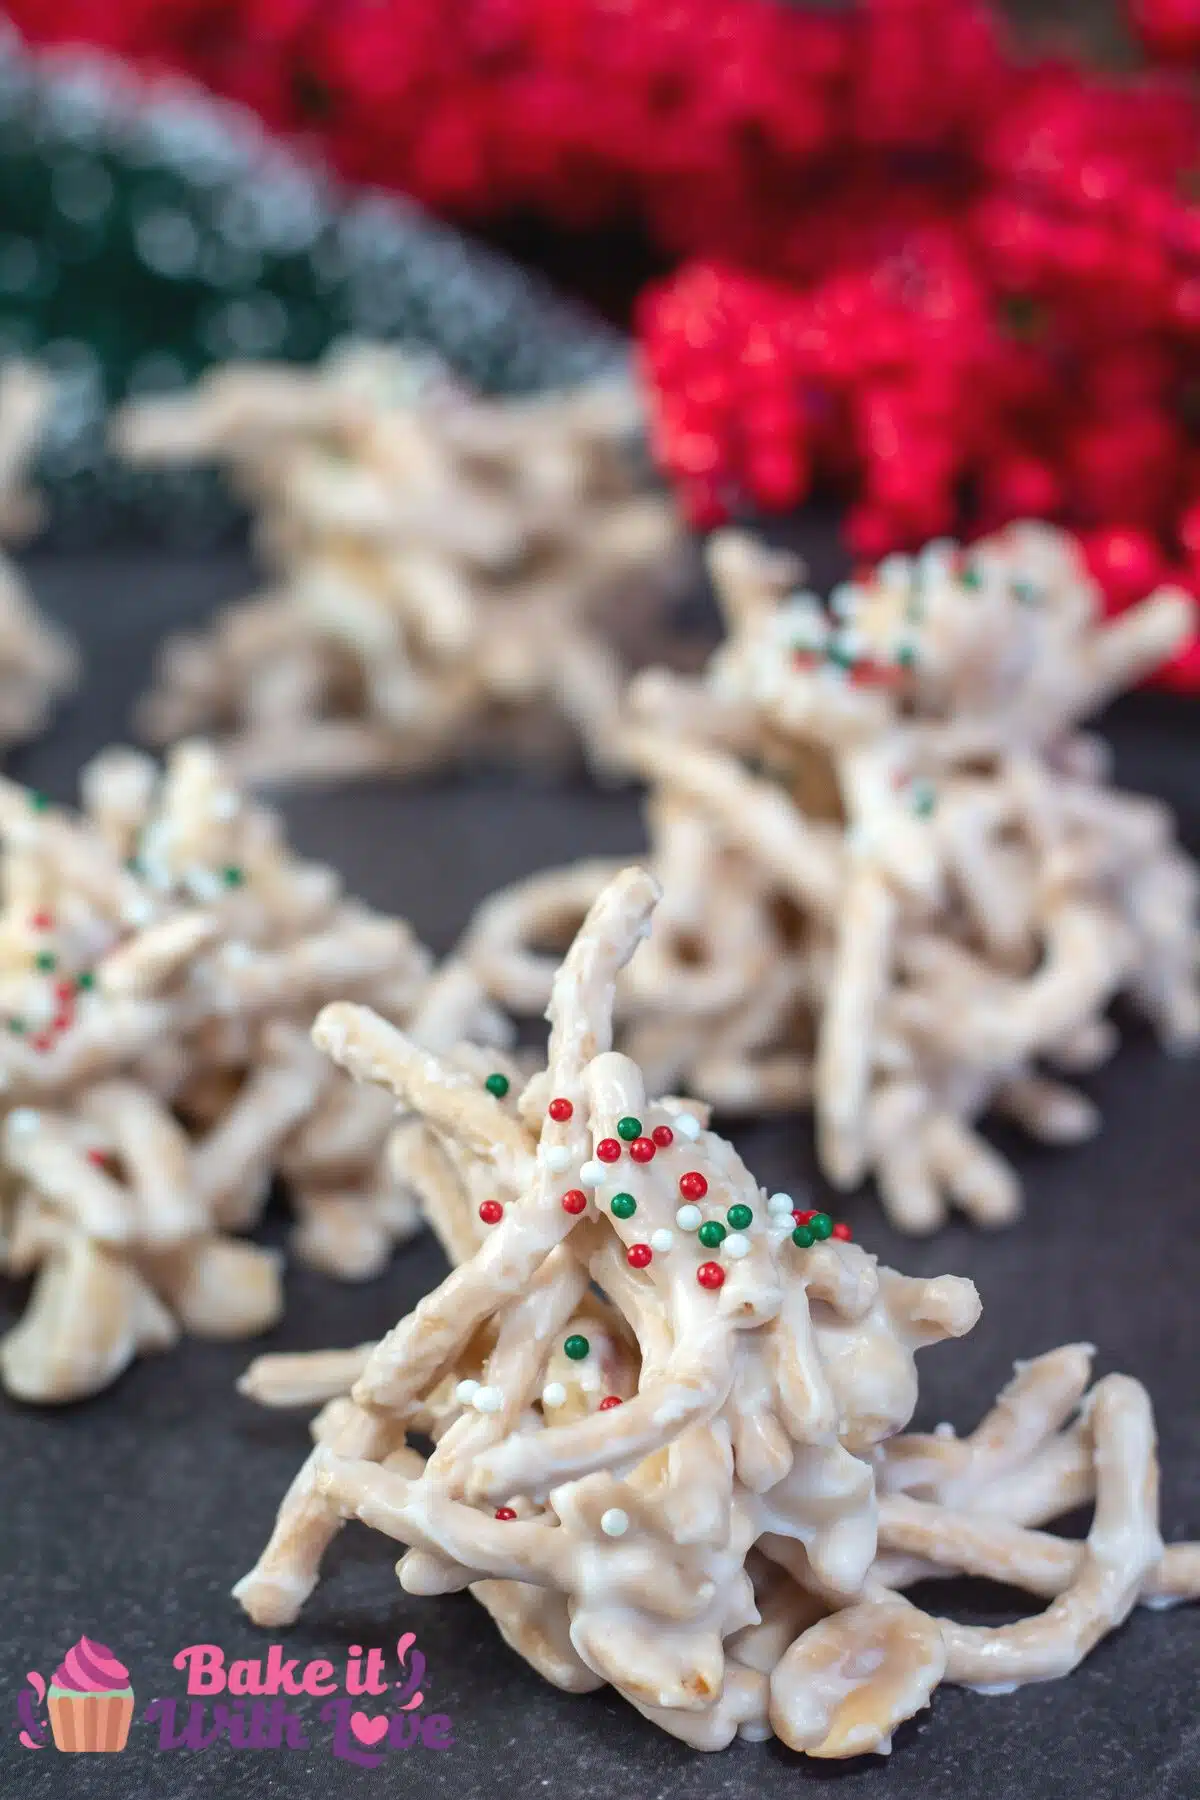 Tall image showing white chocolate haystack cookies.